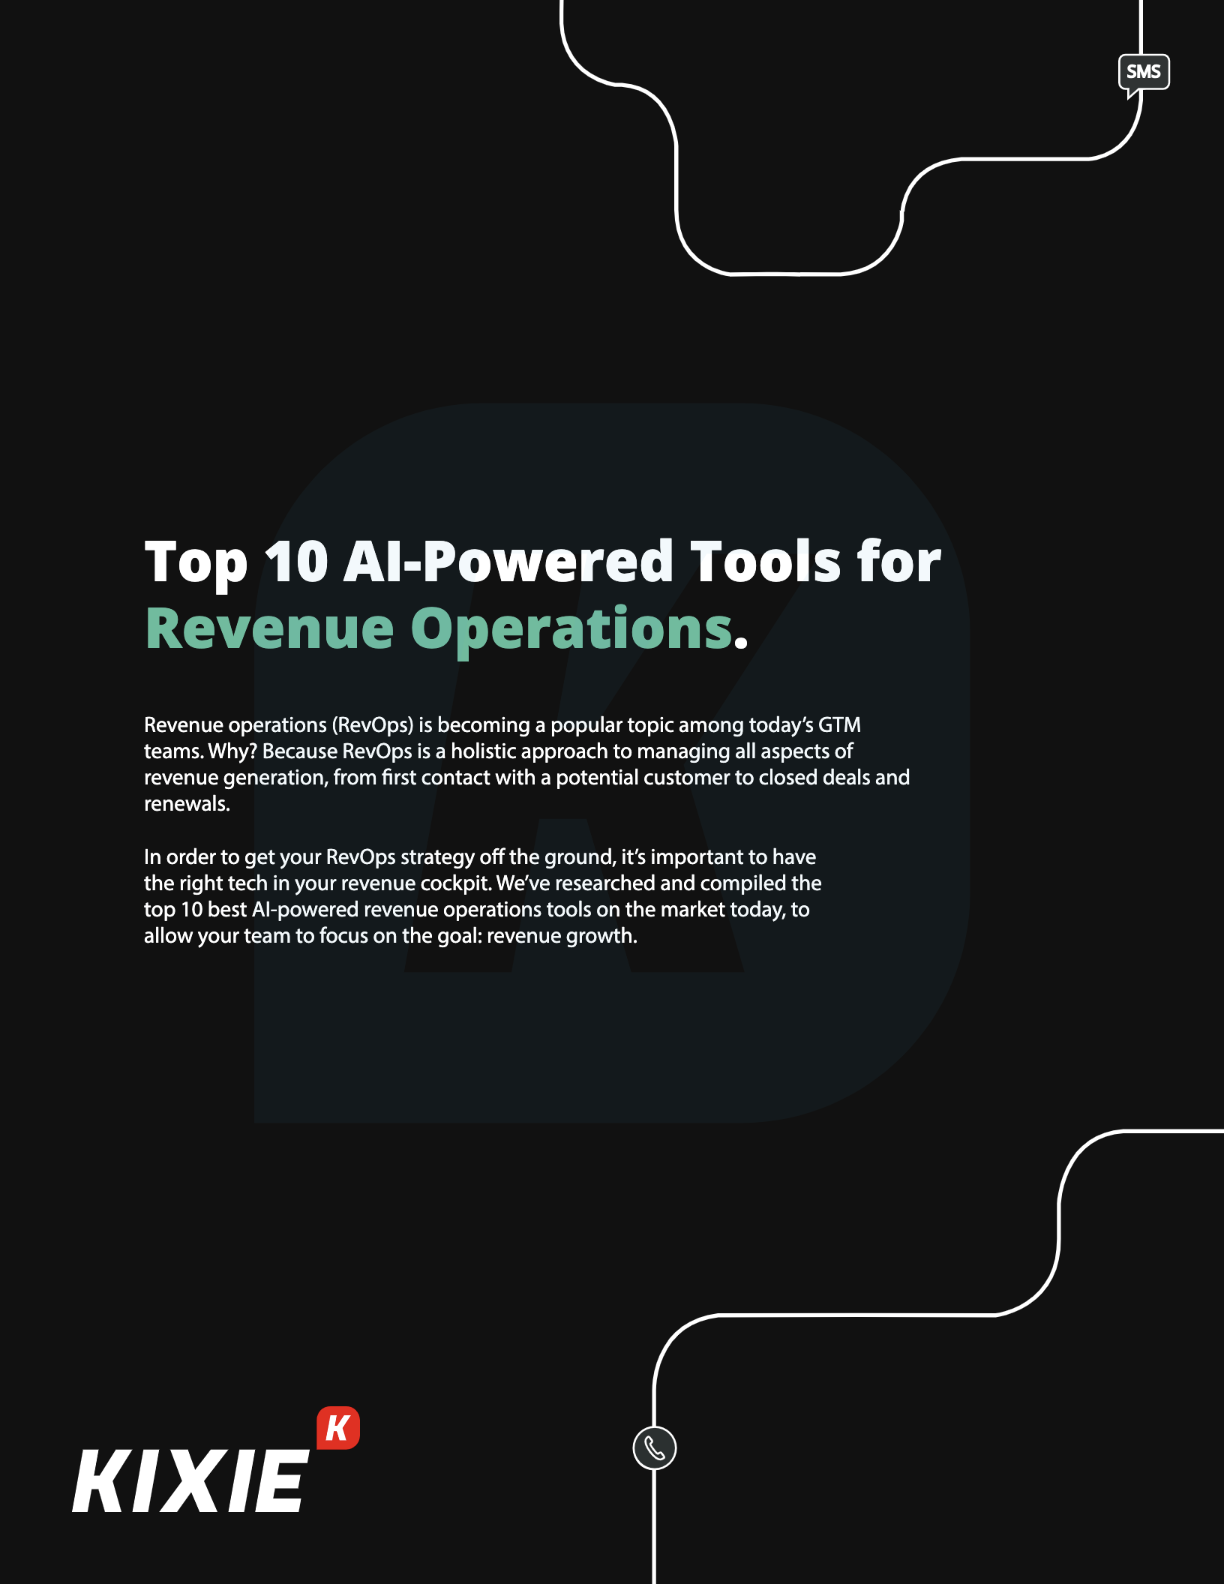 Top 10 AI-Powered RevOps Tools For Growing B2B Sales in 2023